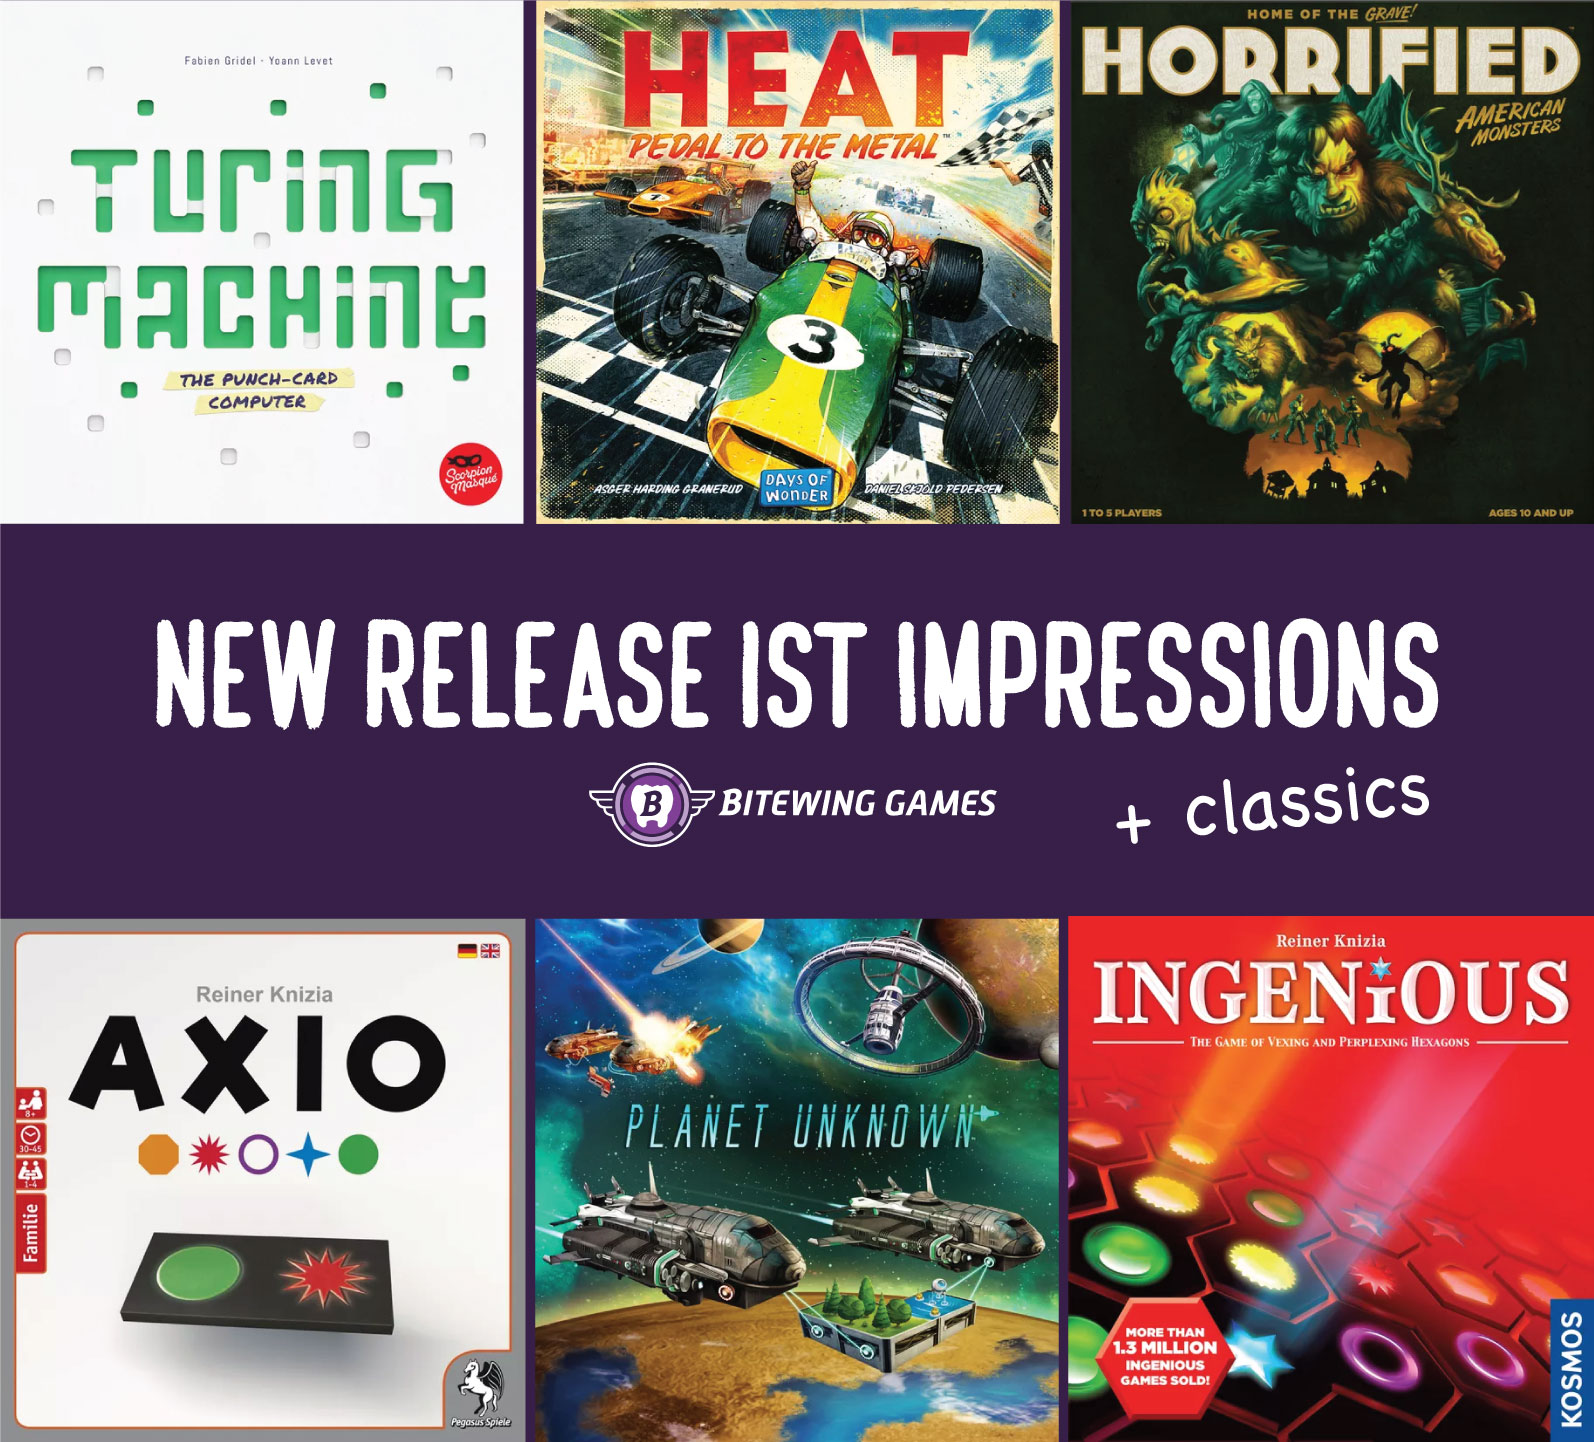 1st Impressions of Heat: Pedal to the Metal, Turing Machine, Planet Unknown, and more!